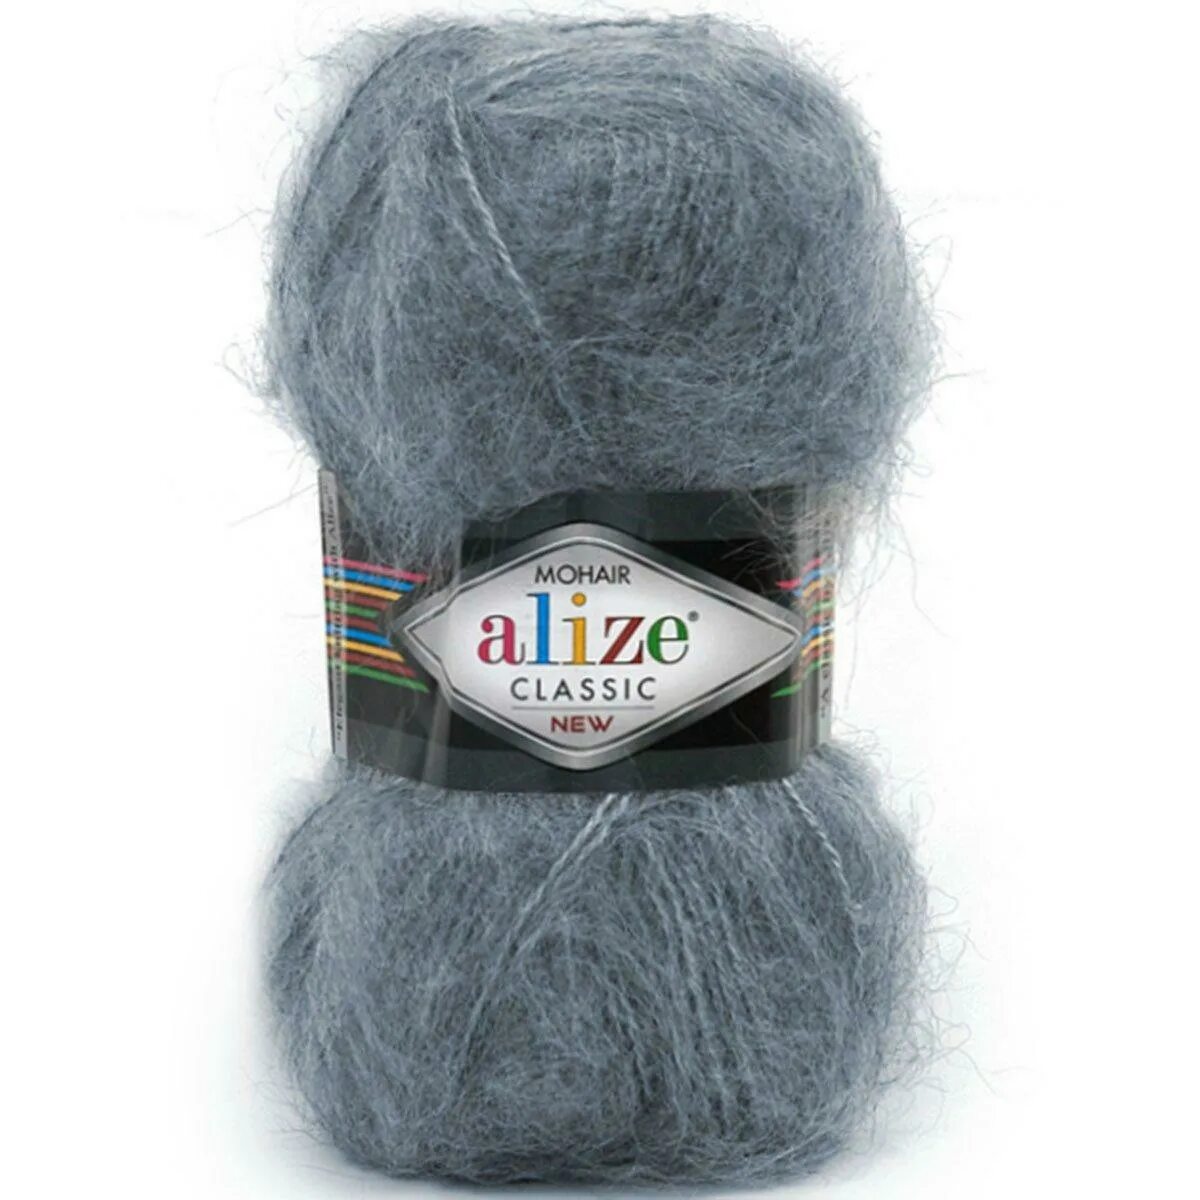 Mohair Classic New Alize 87. Alize Mohair Classic 87. Alize Mohair Classic палитра. Alize Mohair Classic New палитра.